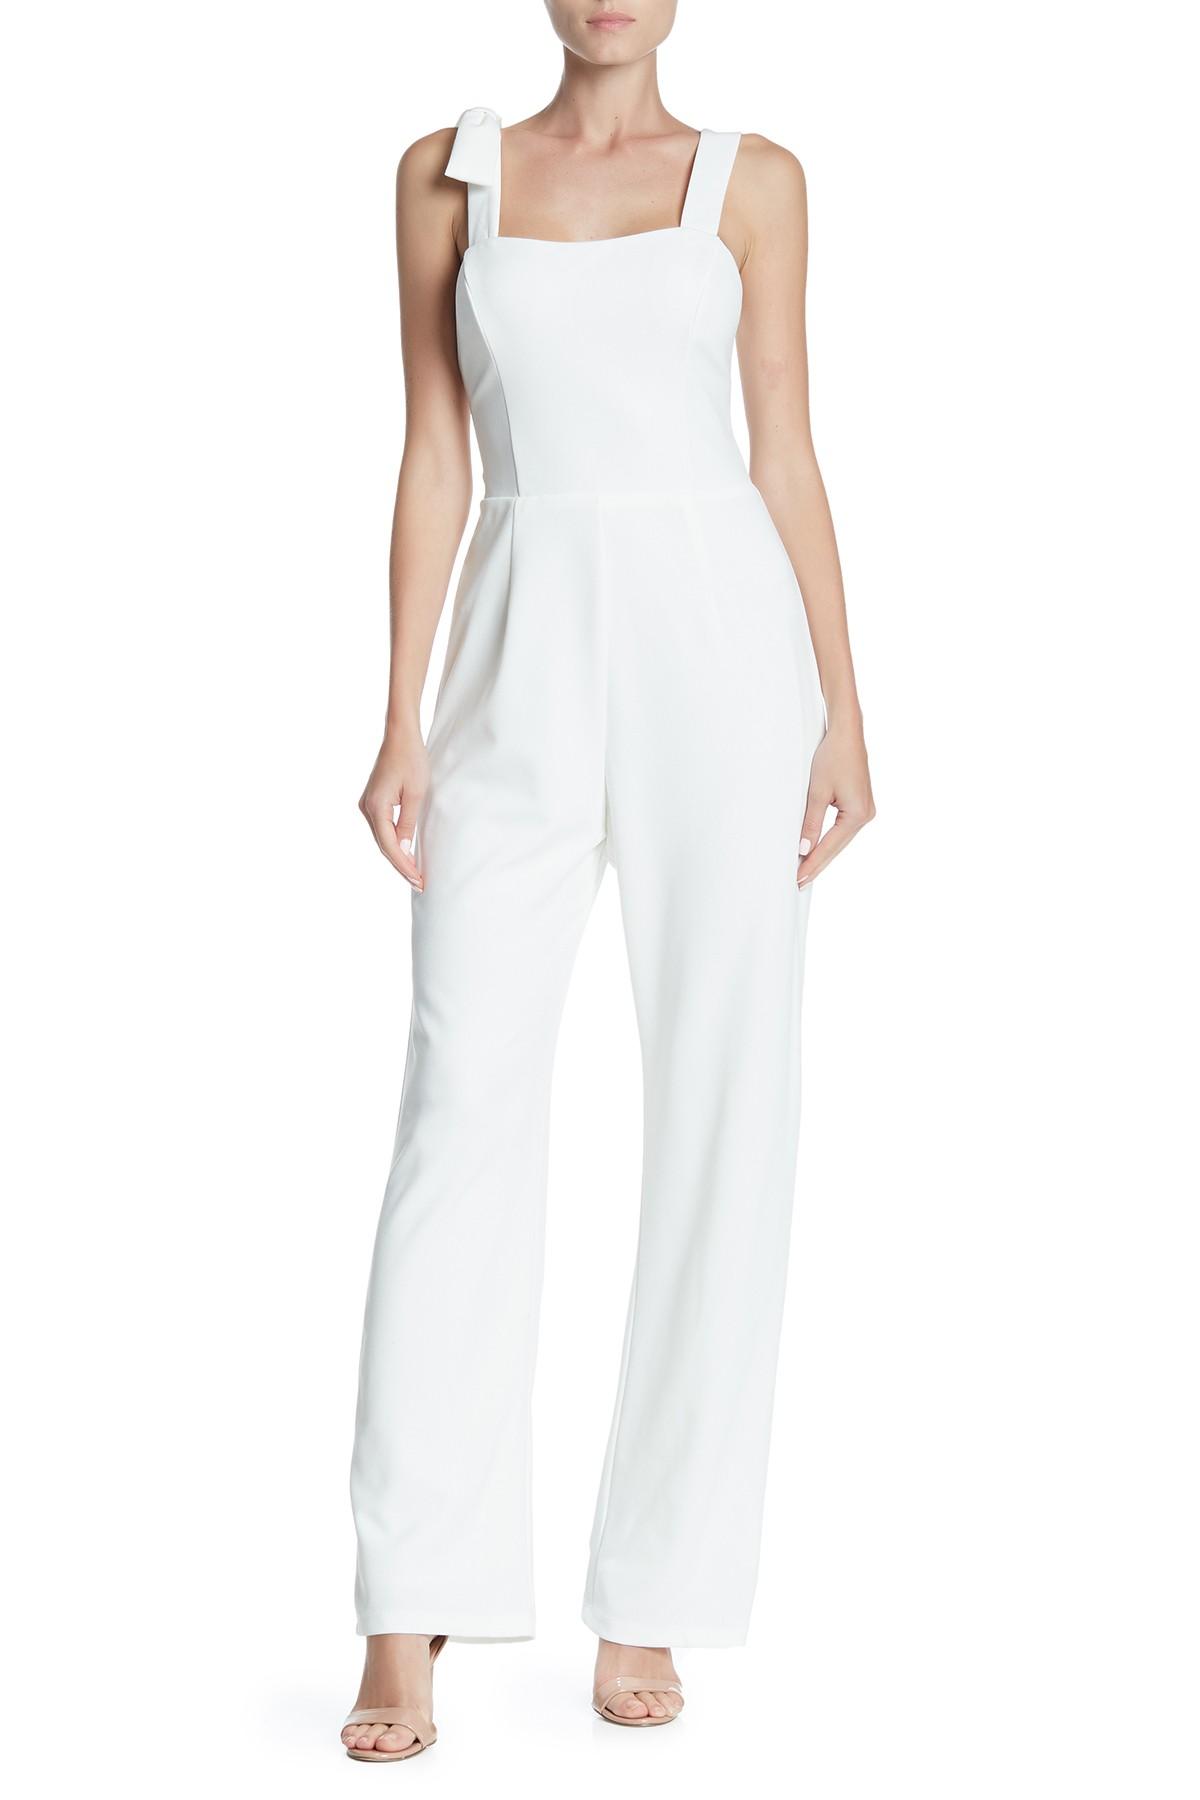 Marina Synthetic Sleeveless Bow Jumpsuit in Ivory (White) - Lyst